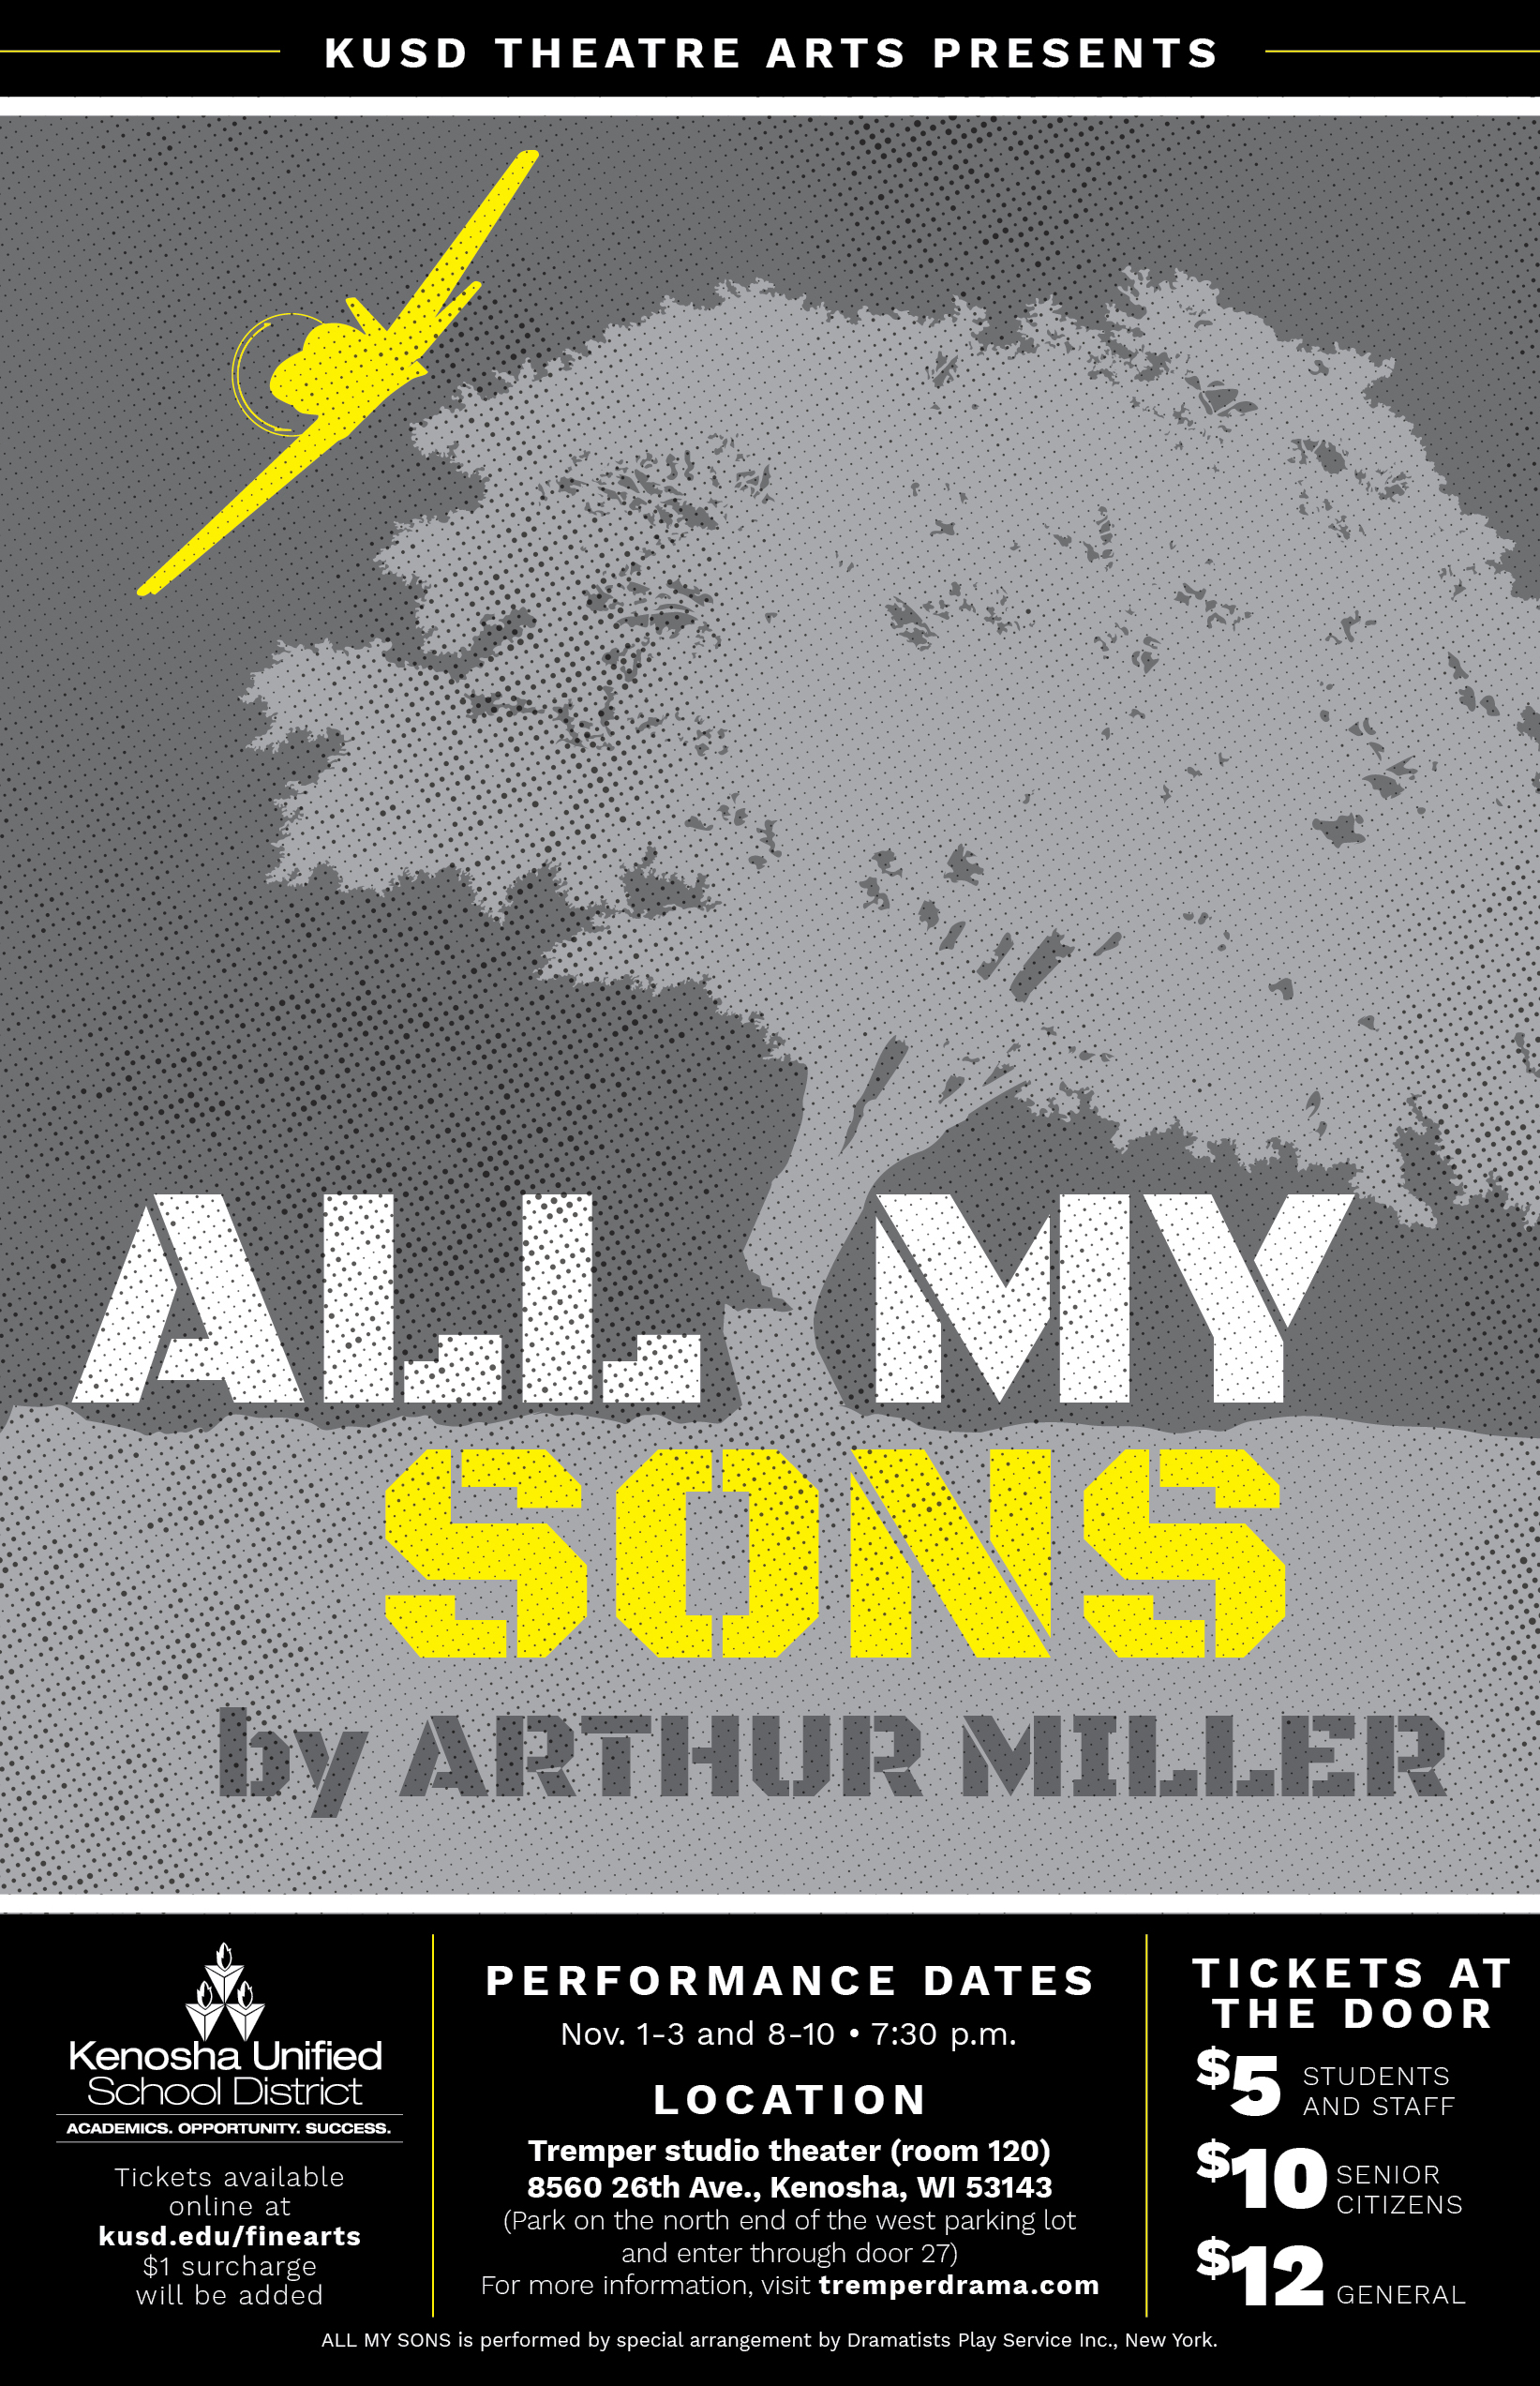 The poster for All My Sons